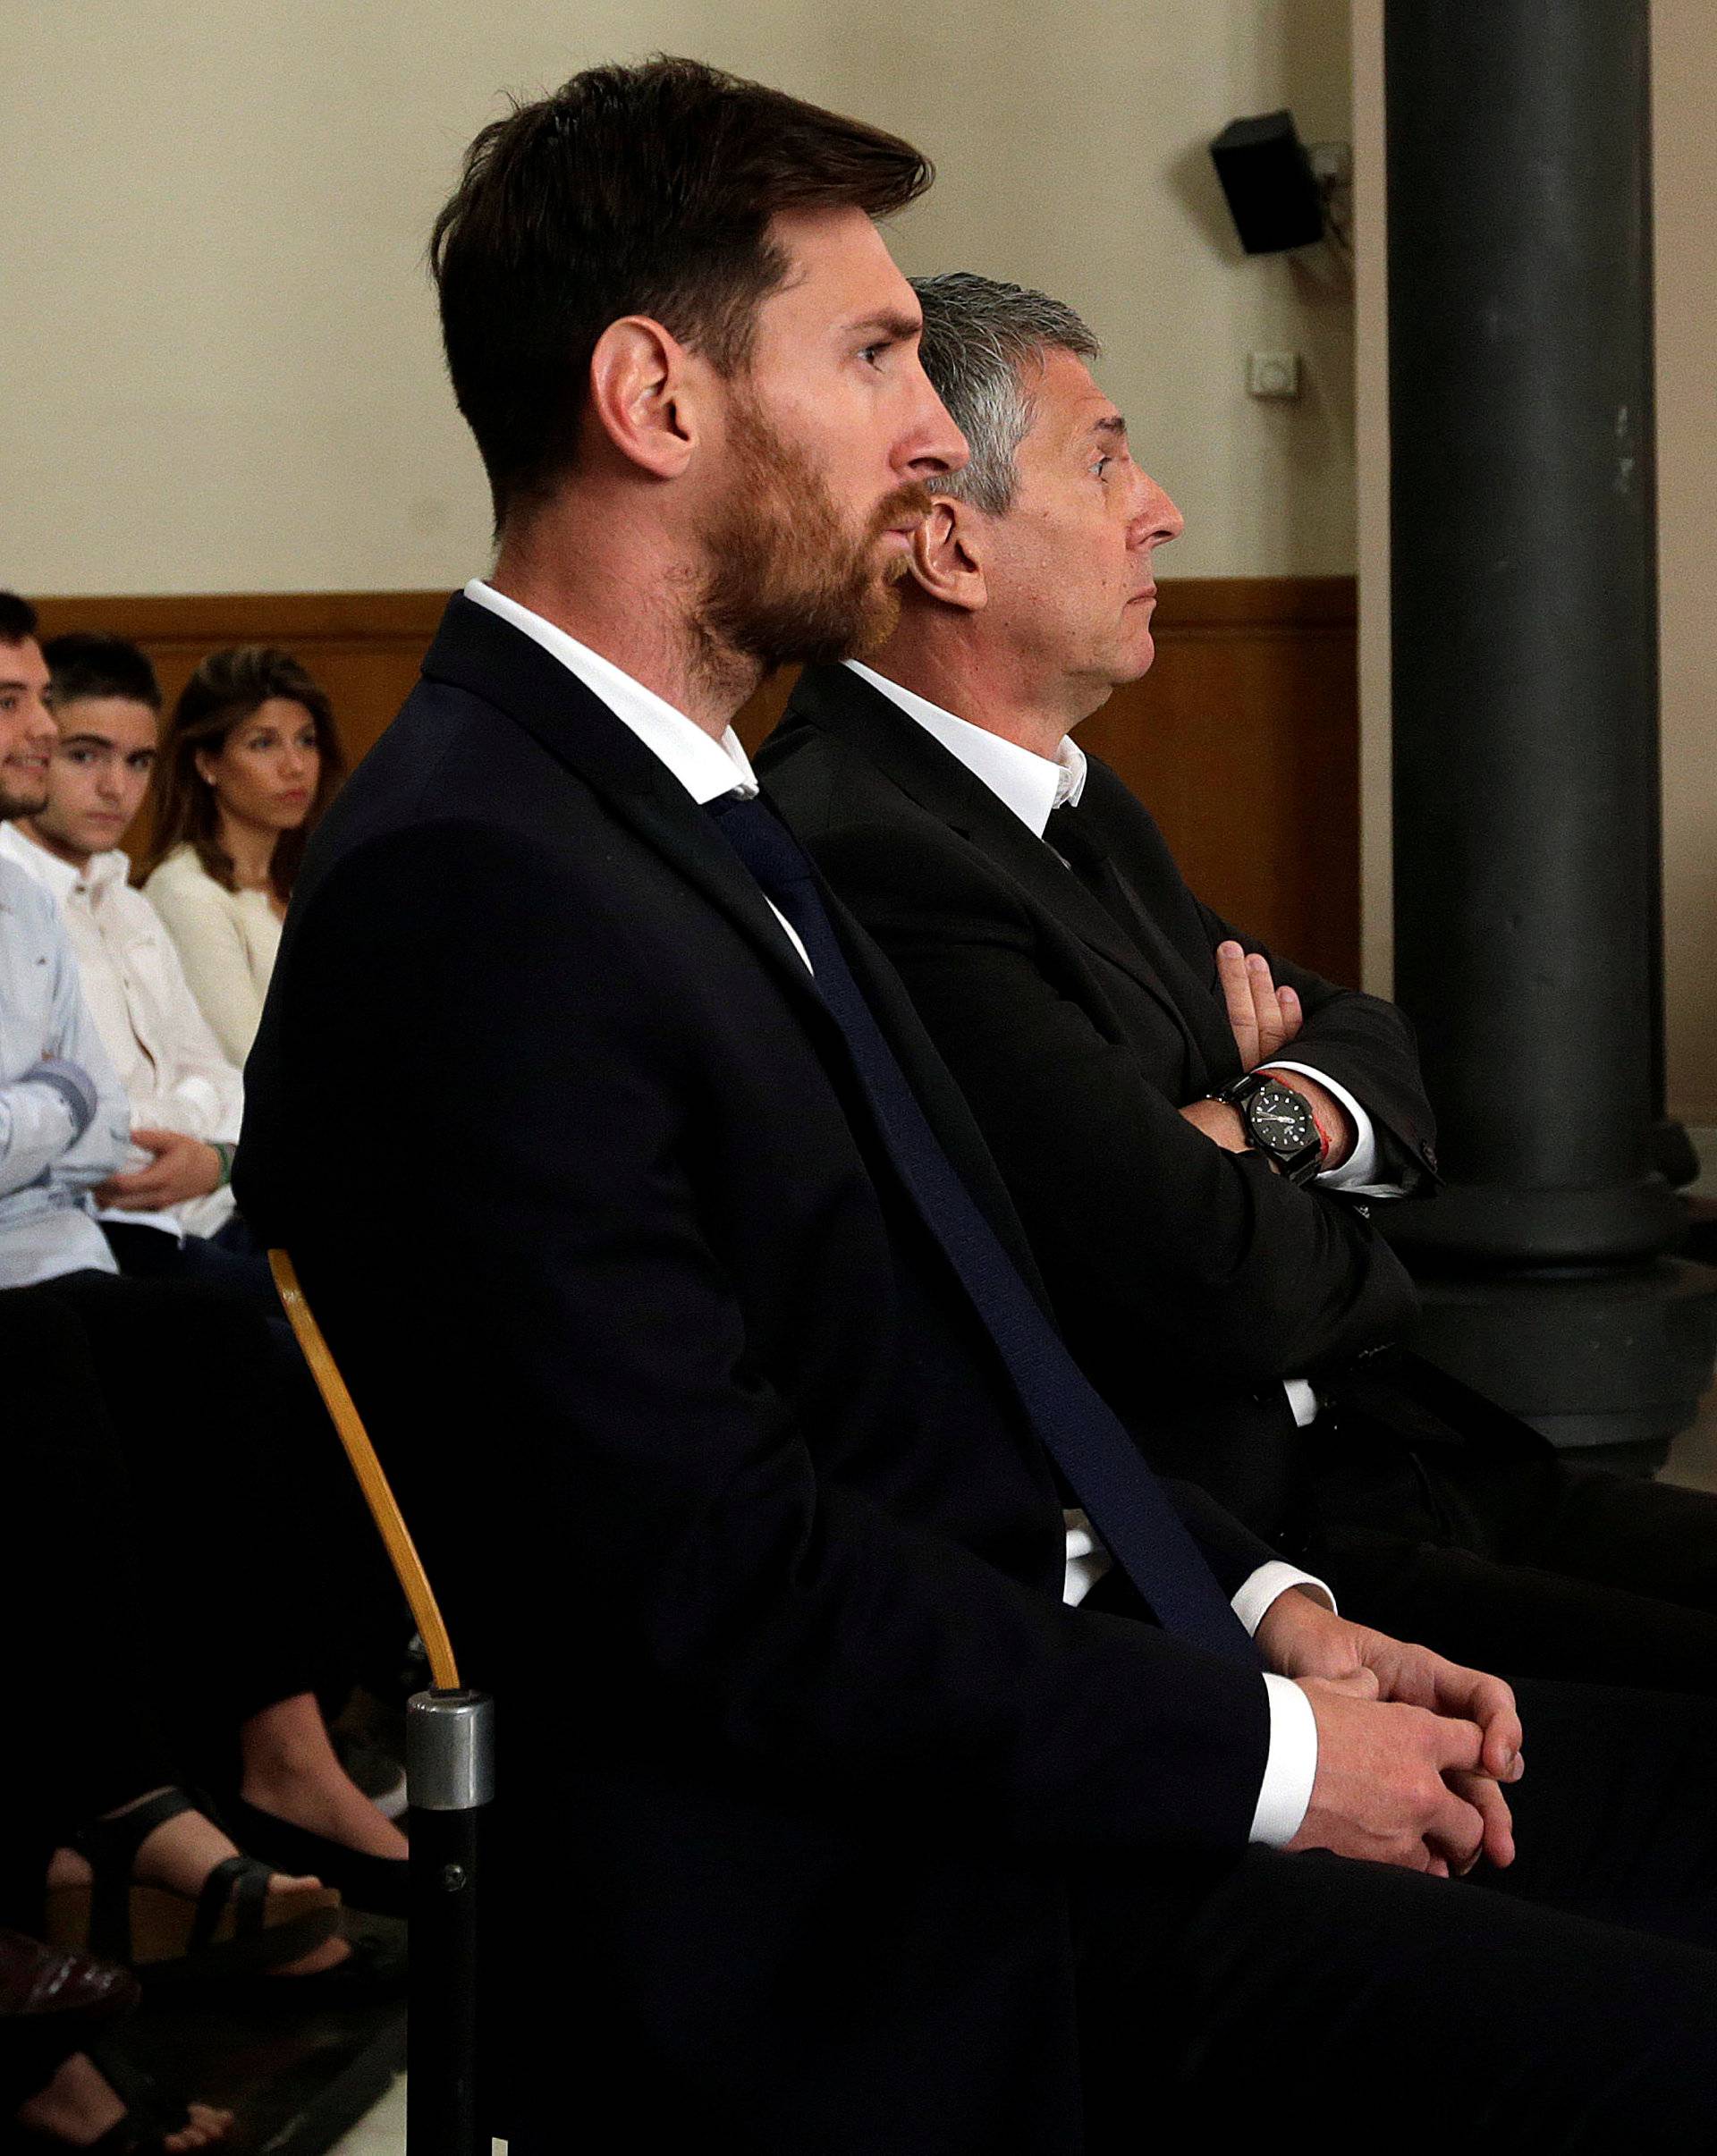 Barcelona's Argentine soccer player Lionel Messi sits in court with his father Jorge Horacio Messi during their  trial for tax fraud in Barcelona